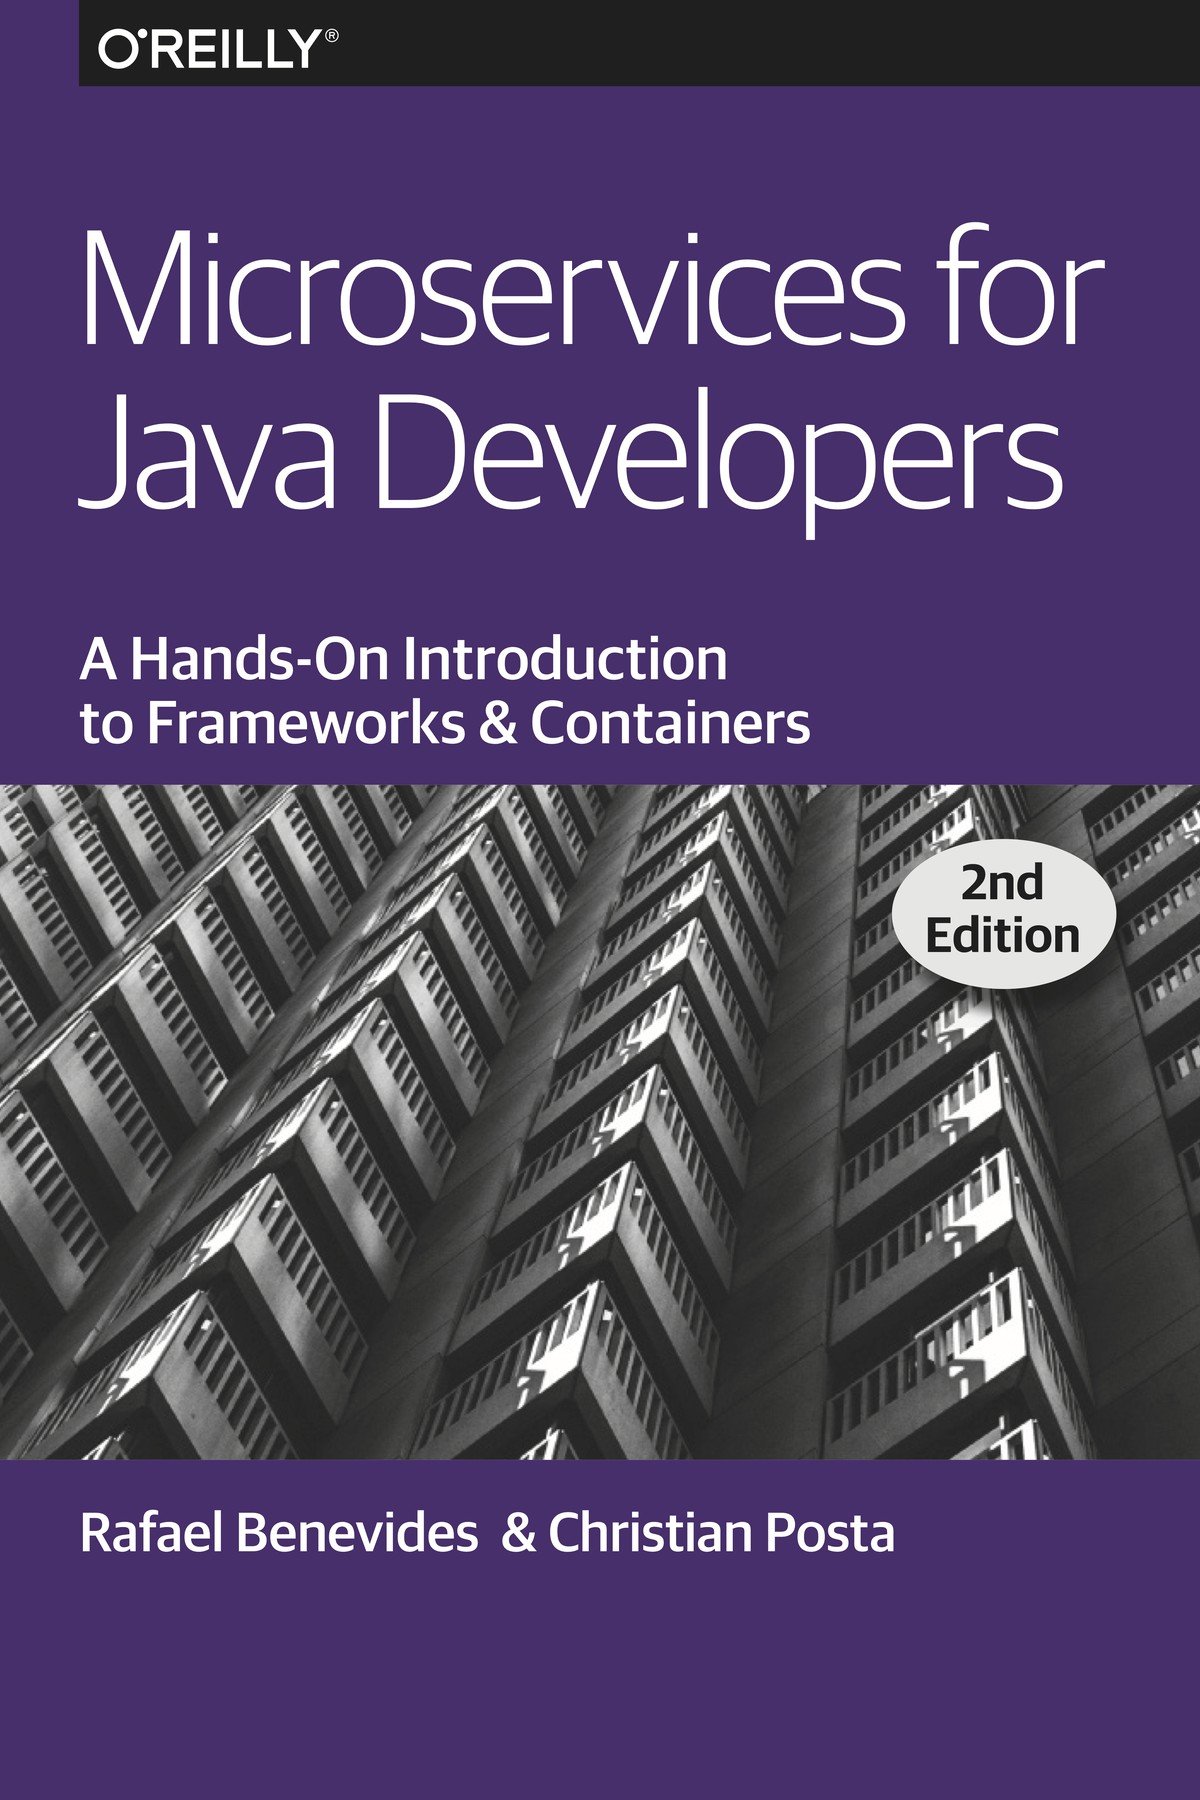 Microservices for Java Developers, 2nd Edition